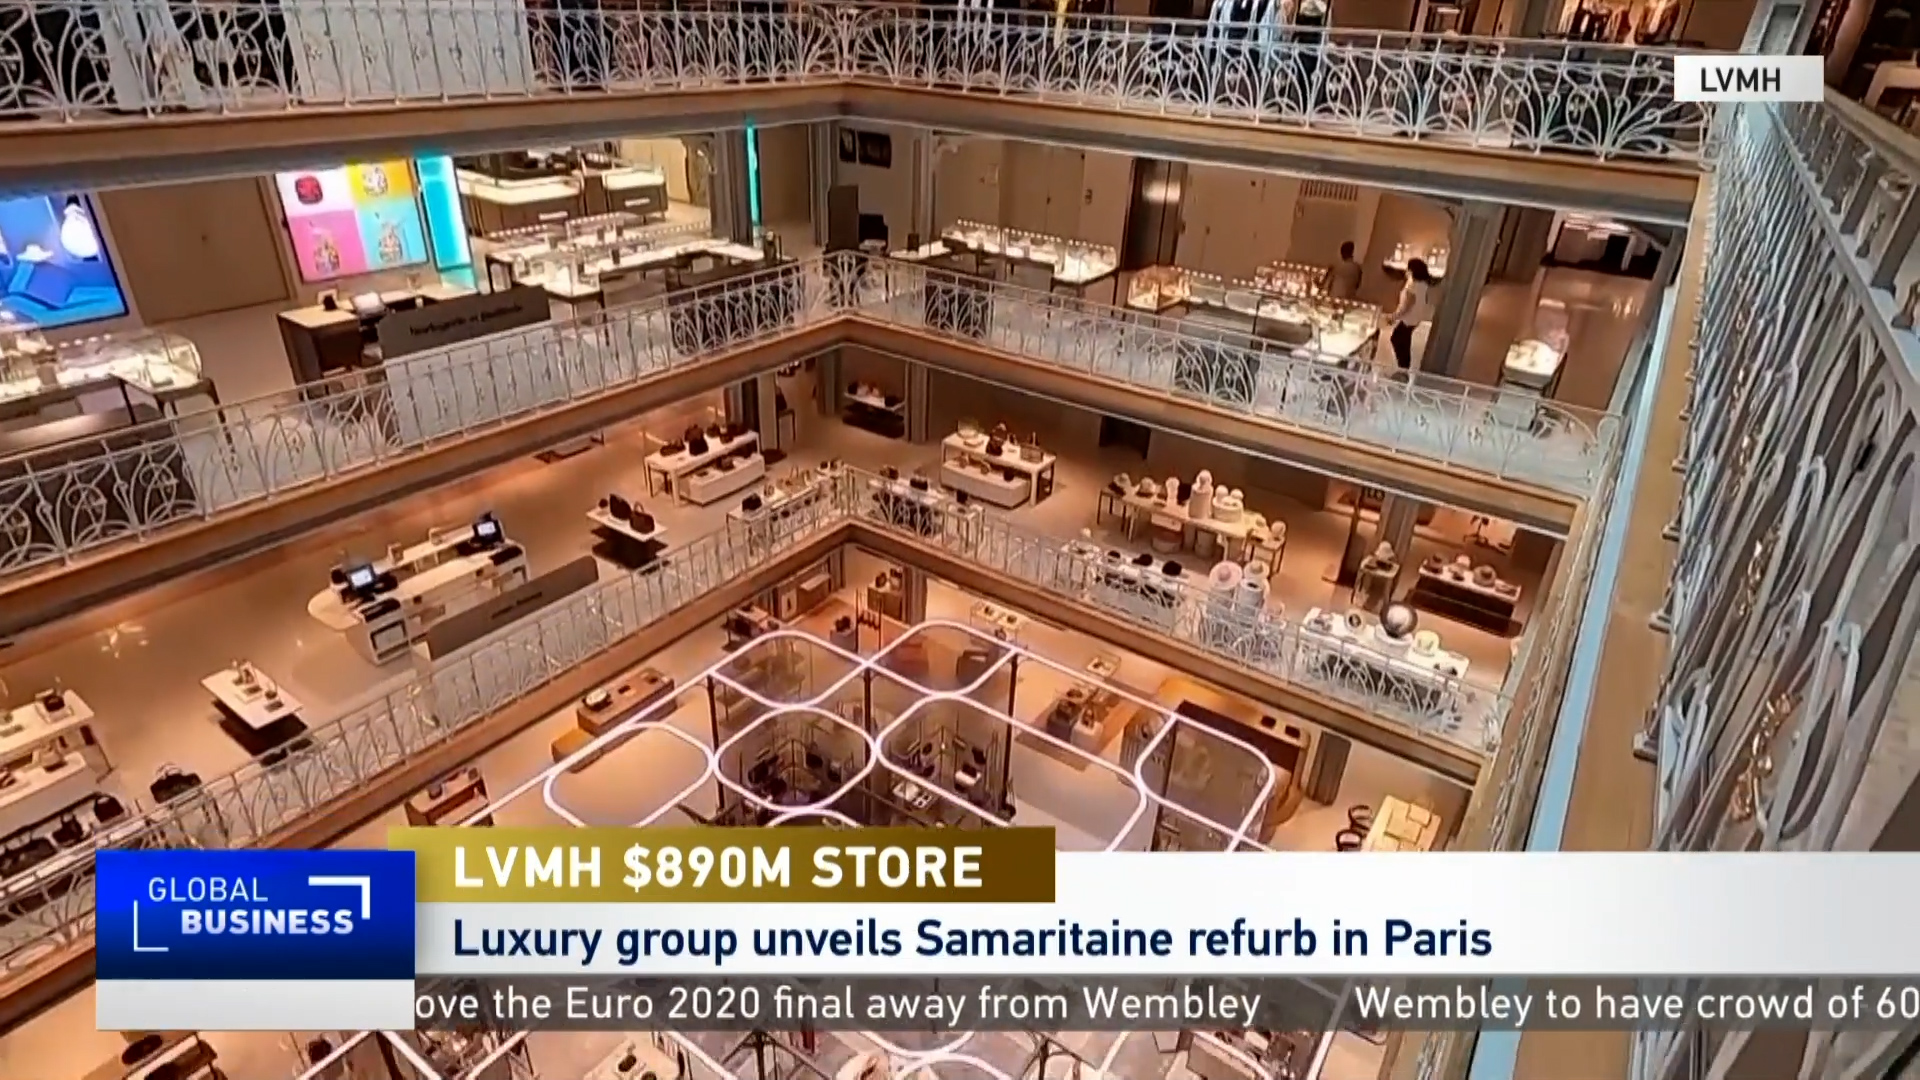 LVMH reopens iconic Paris store after 16 years closed and $890m refurb -  CGTN